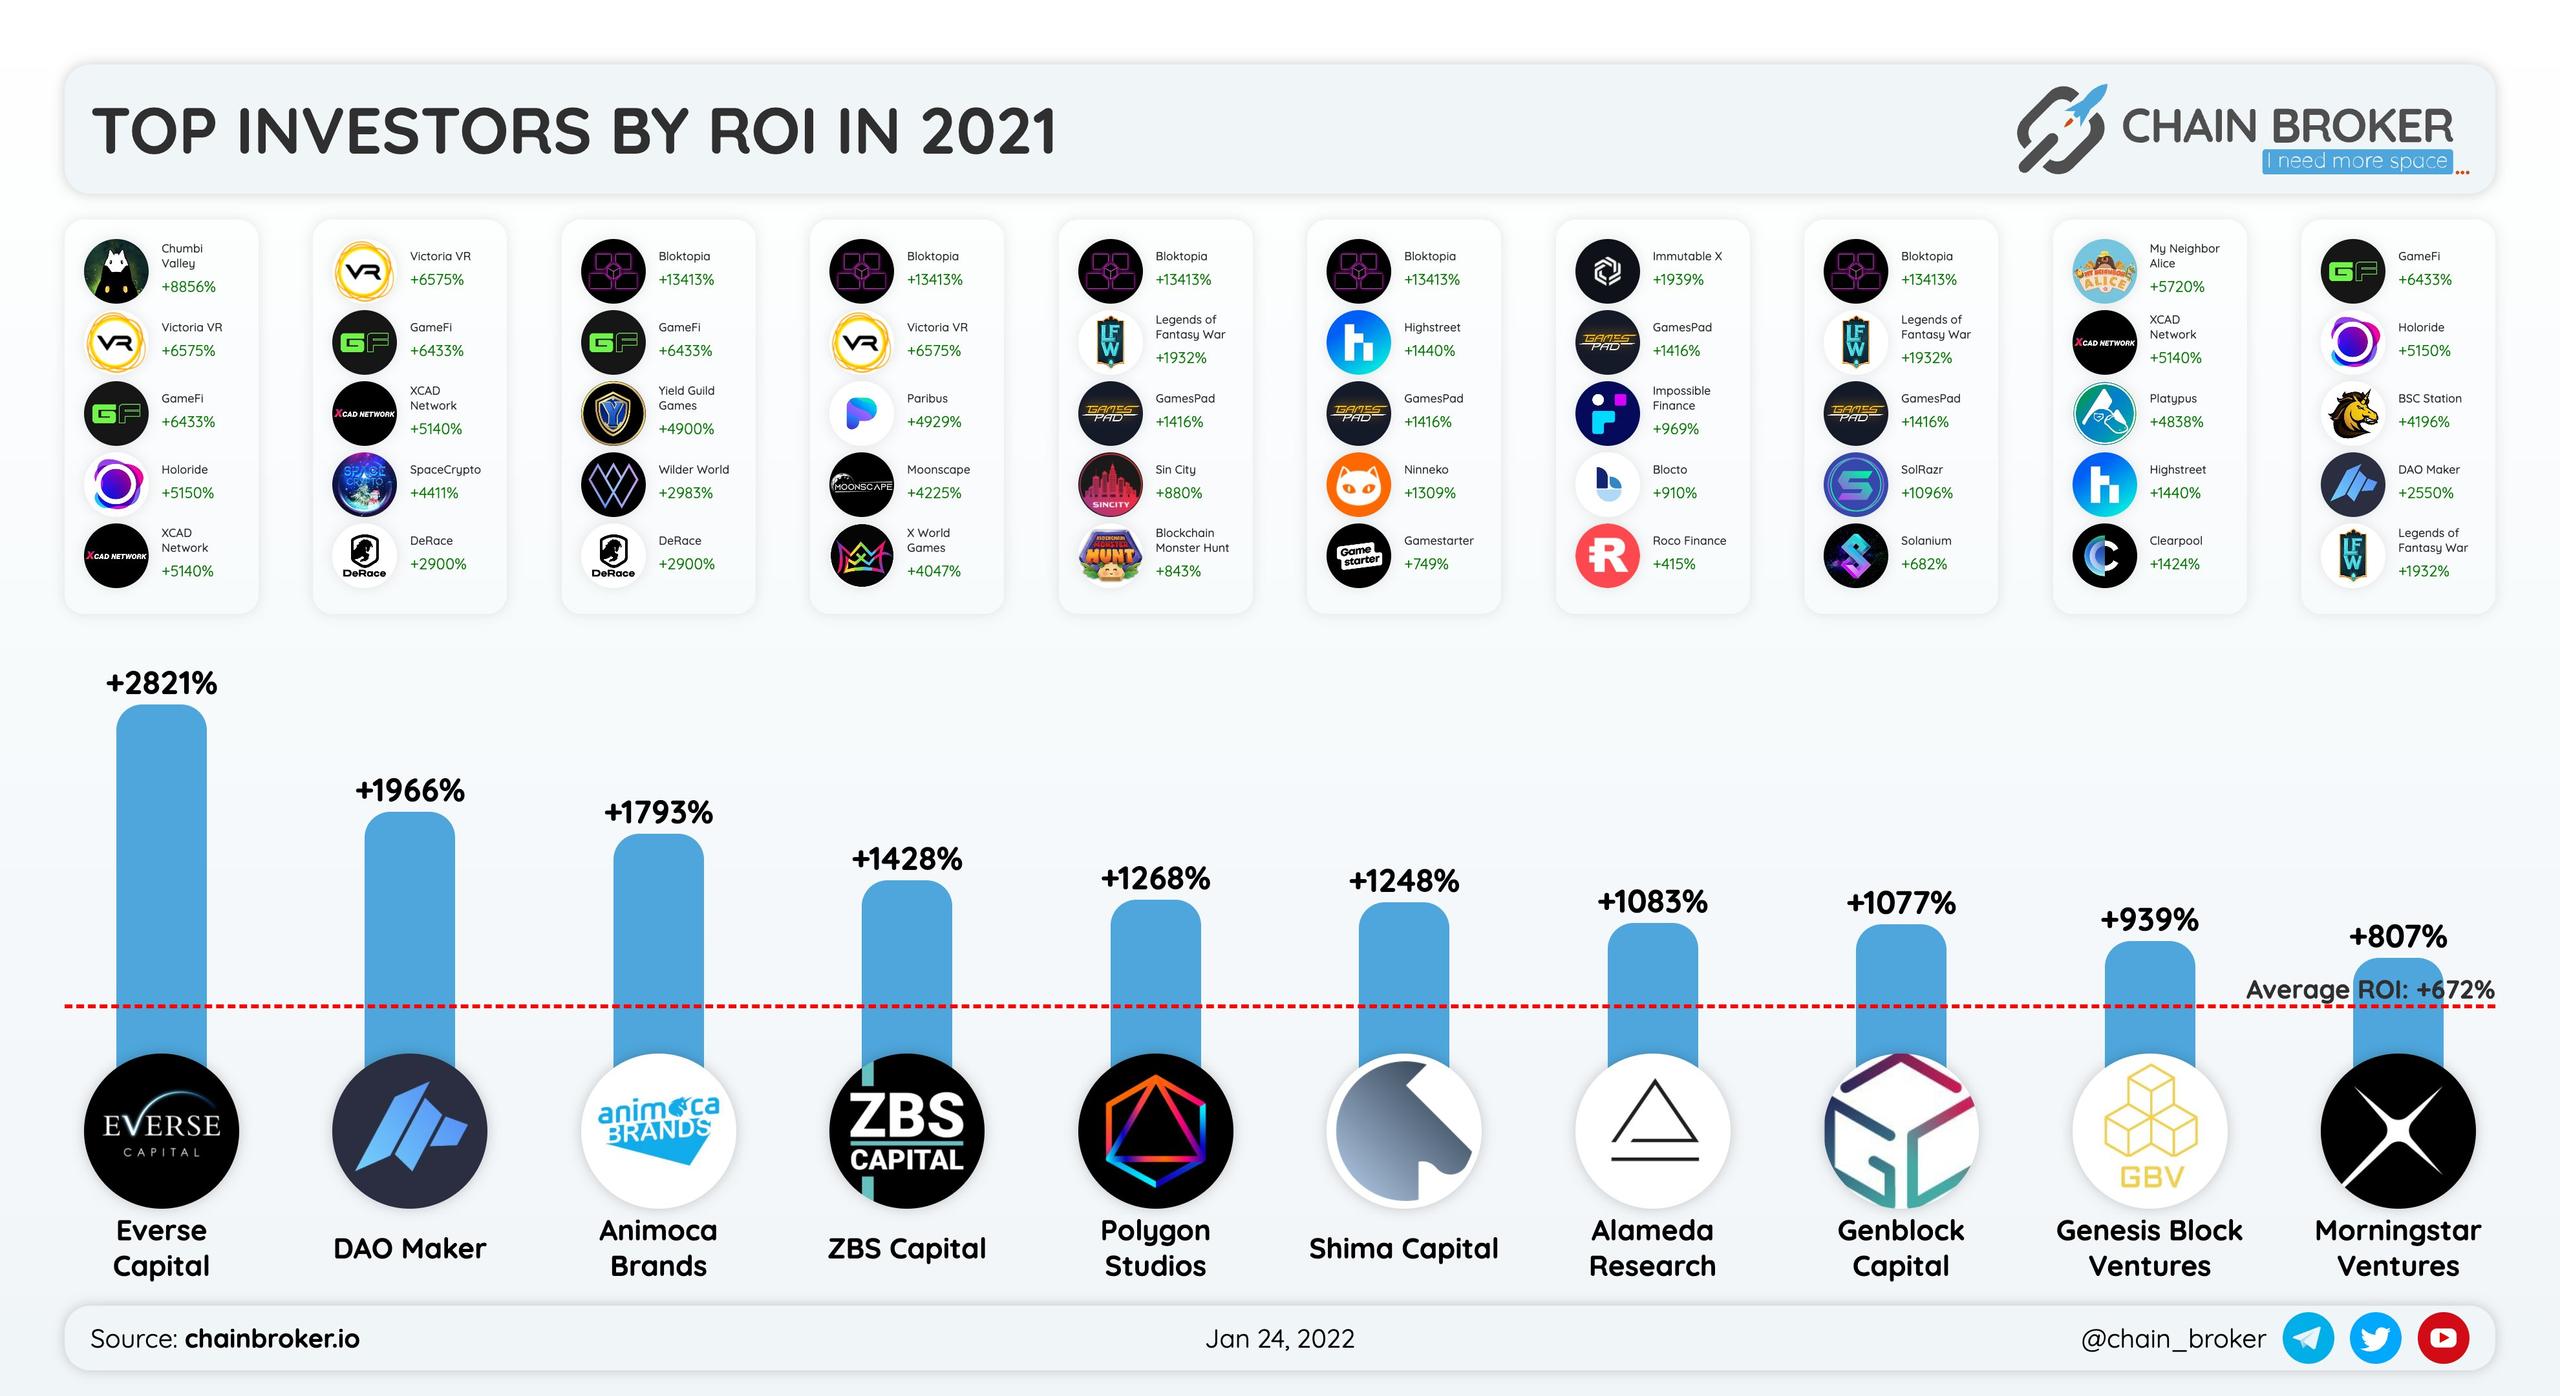 Top investors by project ROI listed